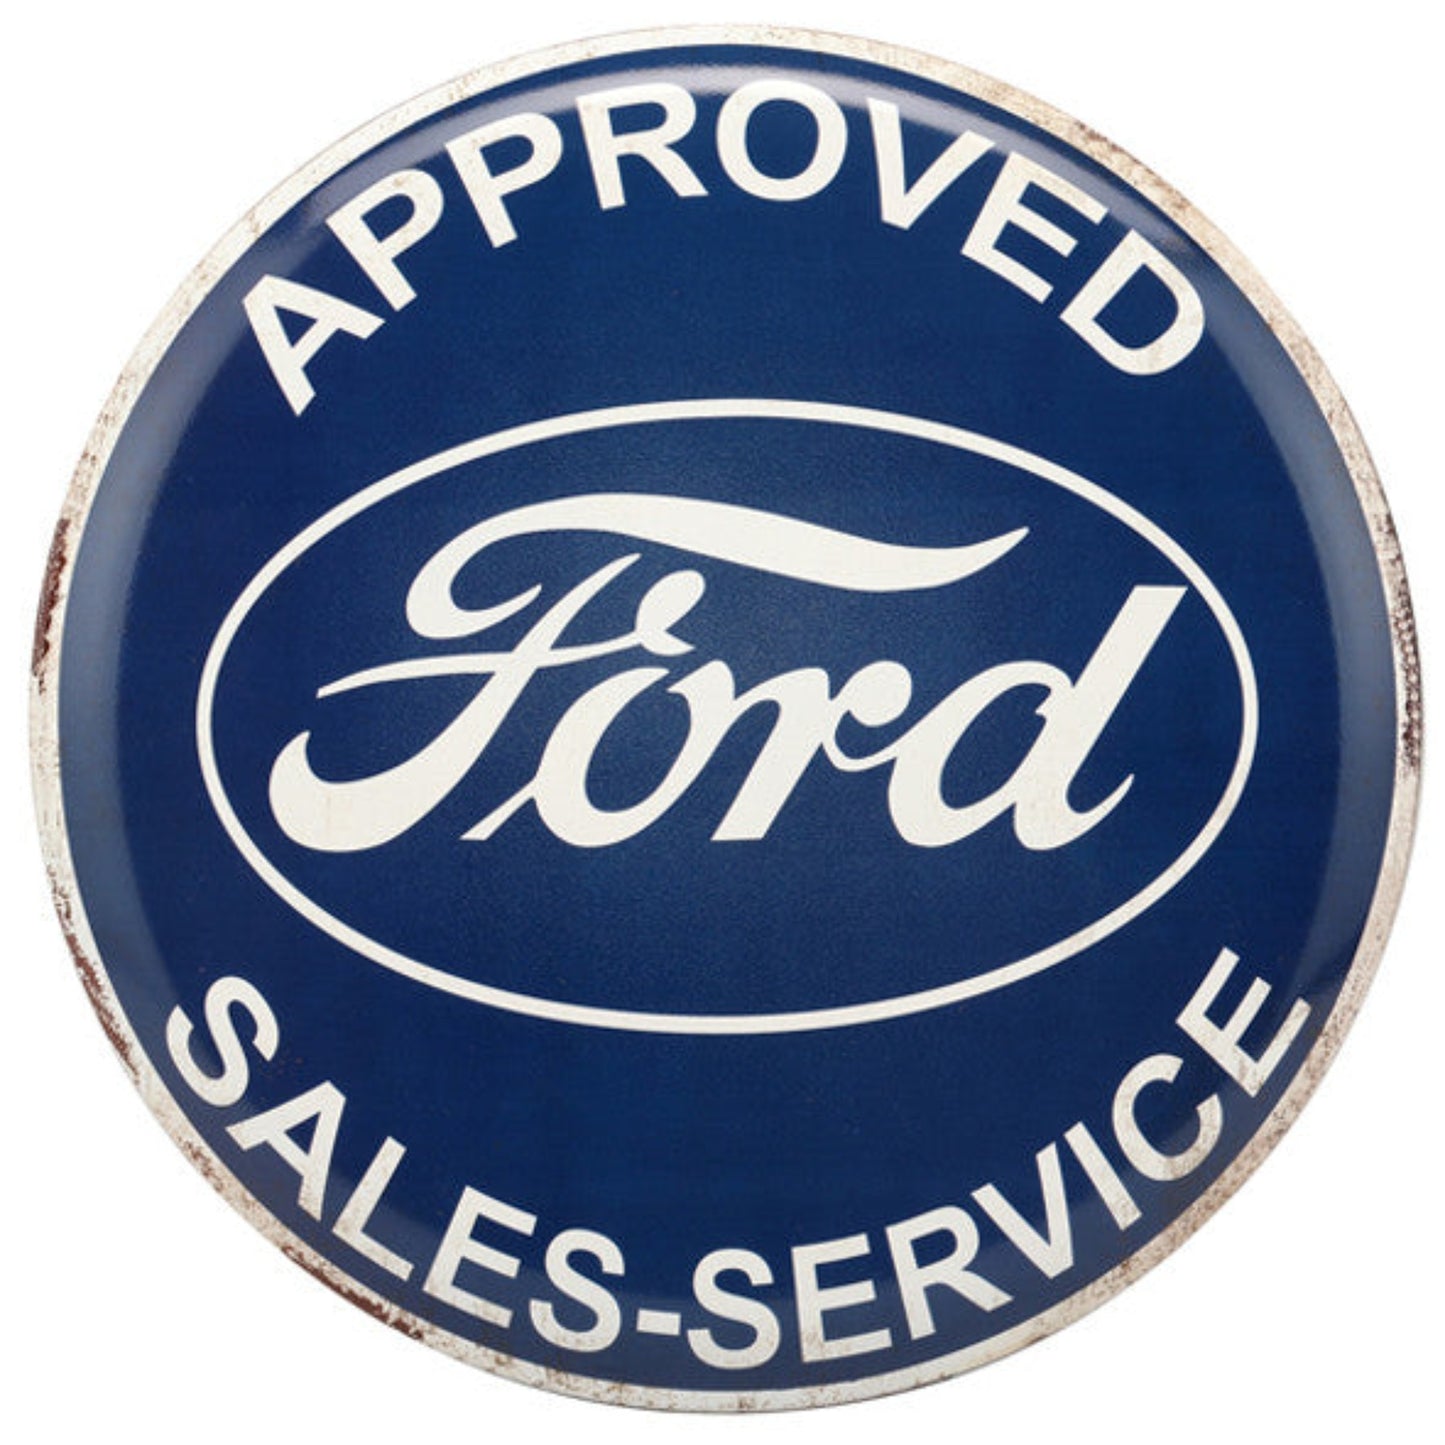 Shiny blue round tin sign featuring the white Ford logo with the words "Approved Sales-Service".